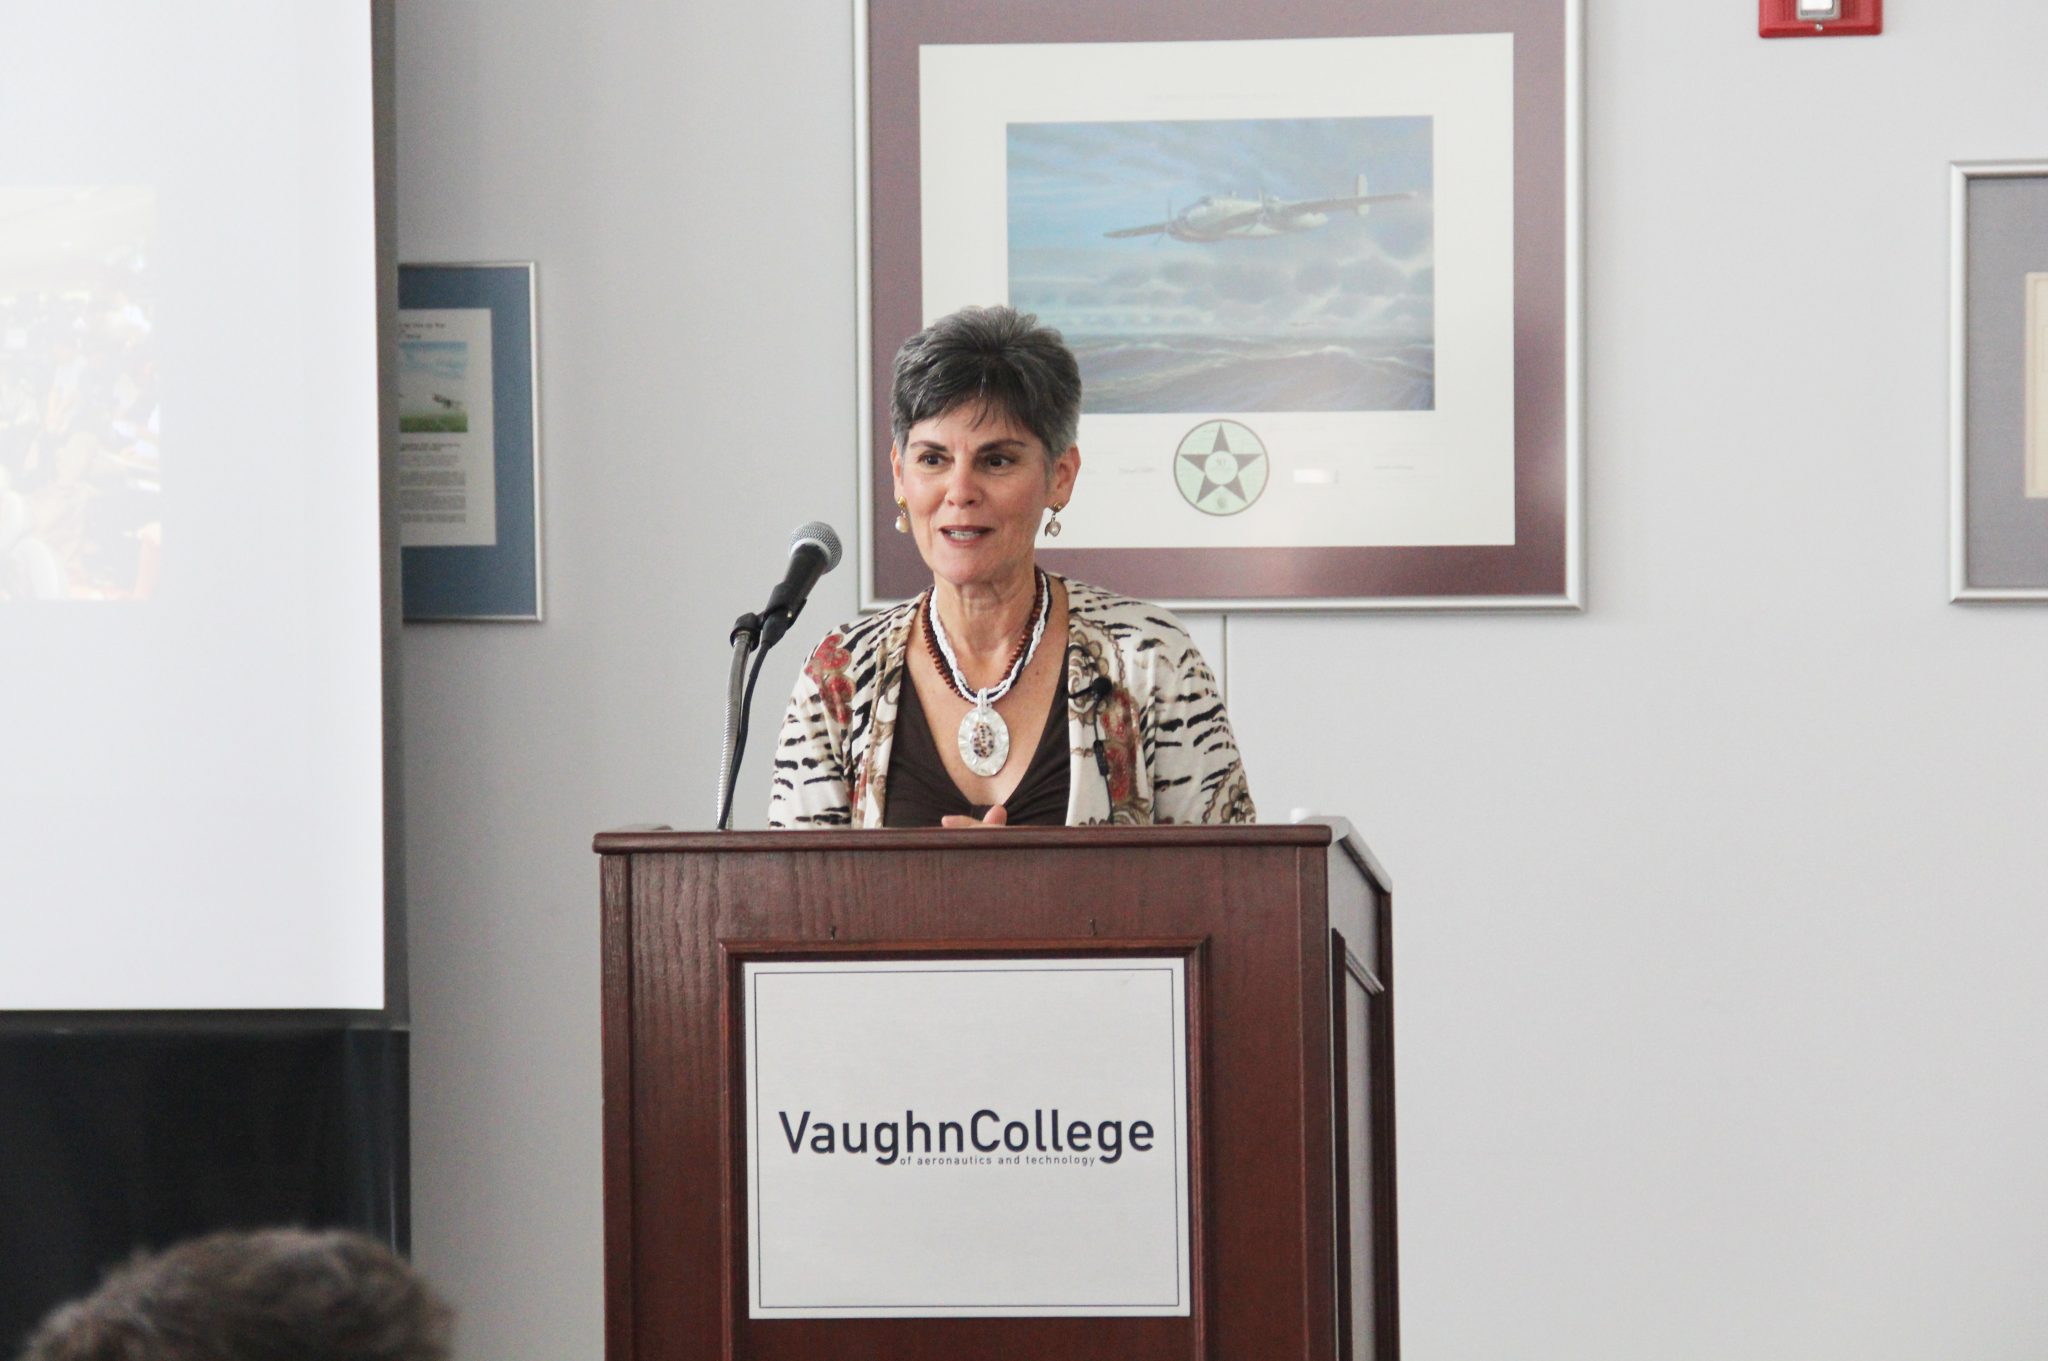 Author and Journalist Christine Negroni Speaks to Vaughn Students About the Aviation Industry and Her Experiences